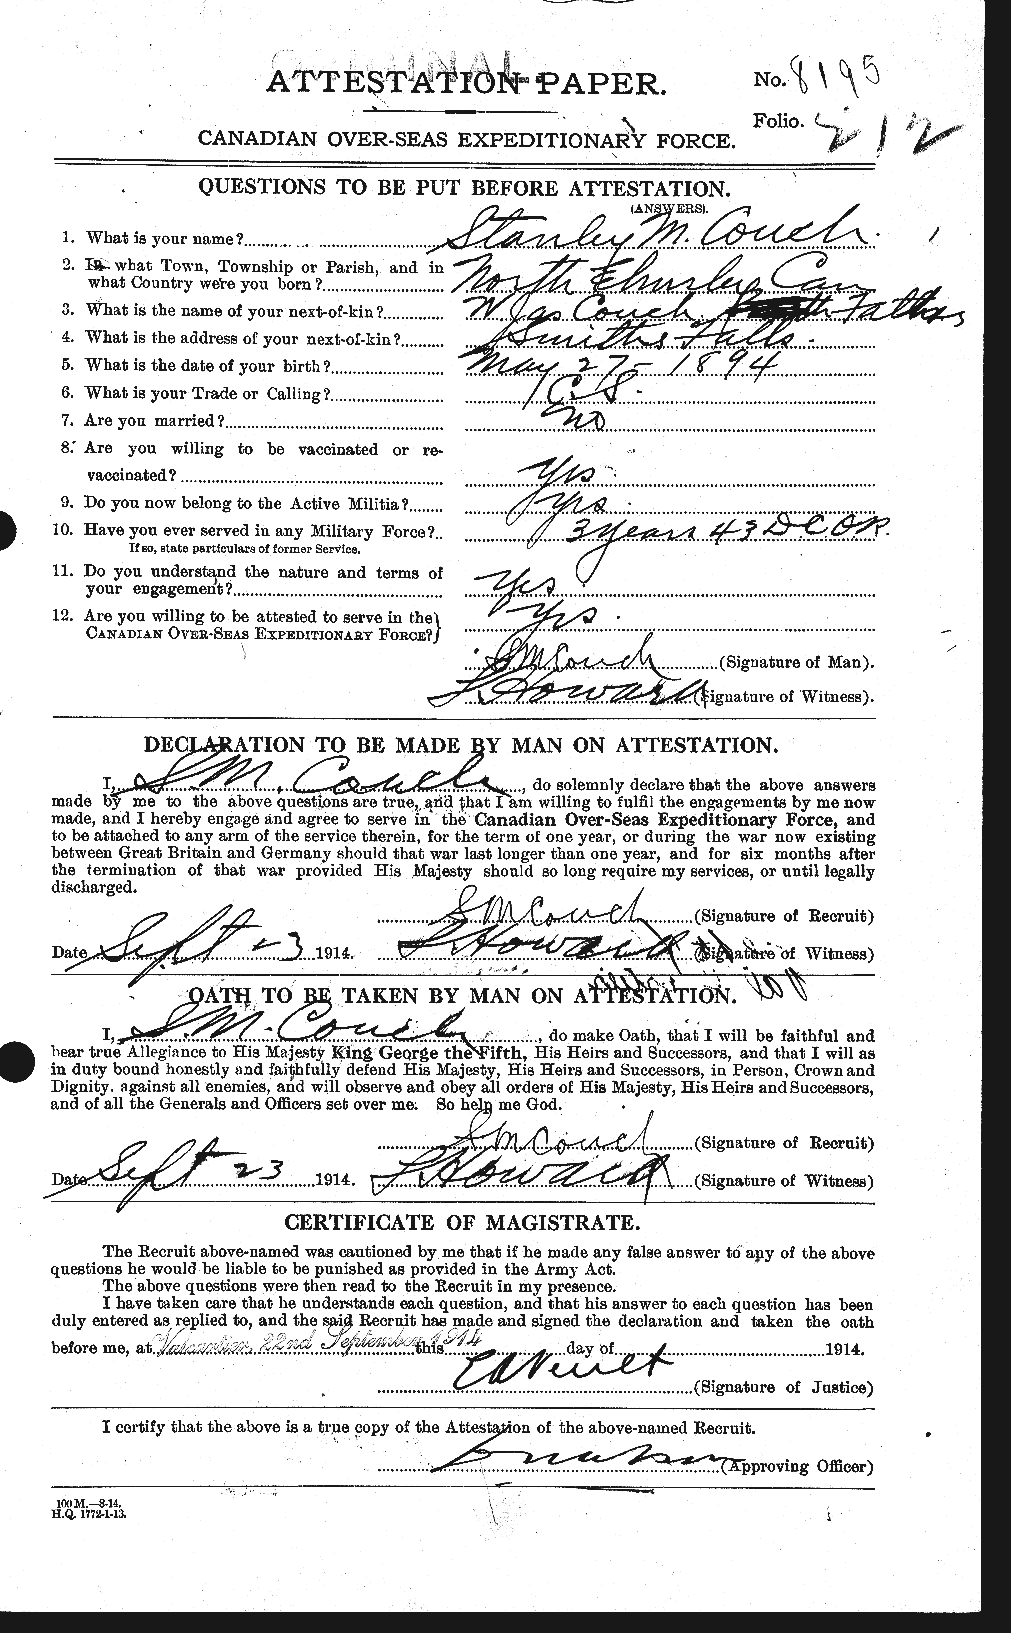 Personnel Records of the First World War - CEF 059516a